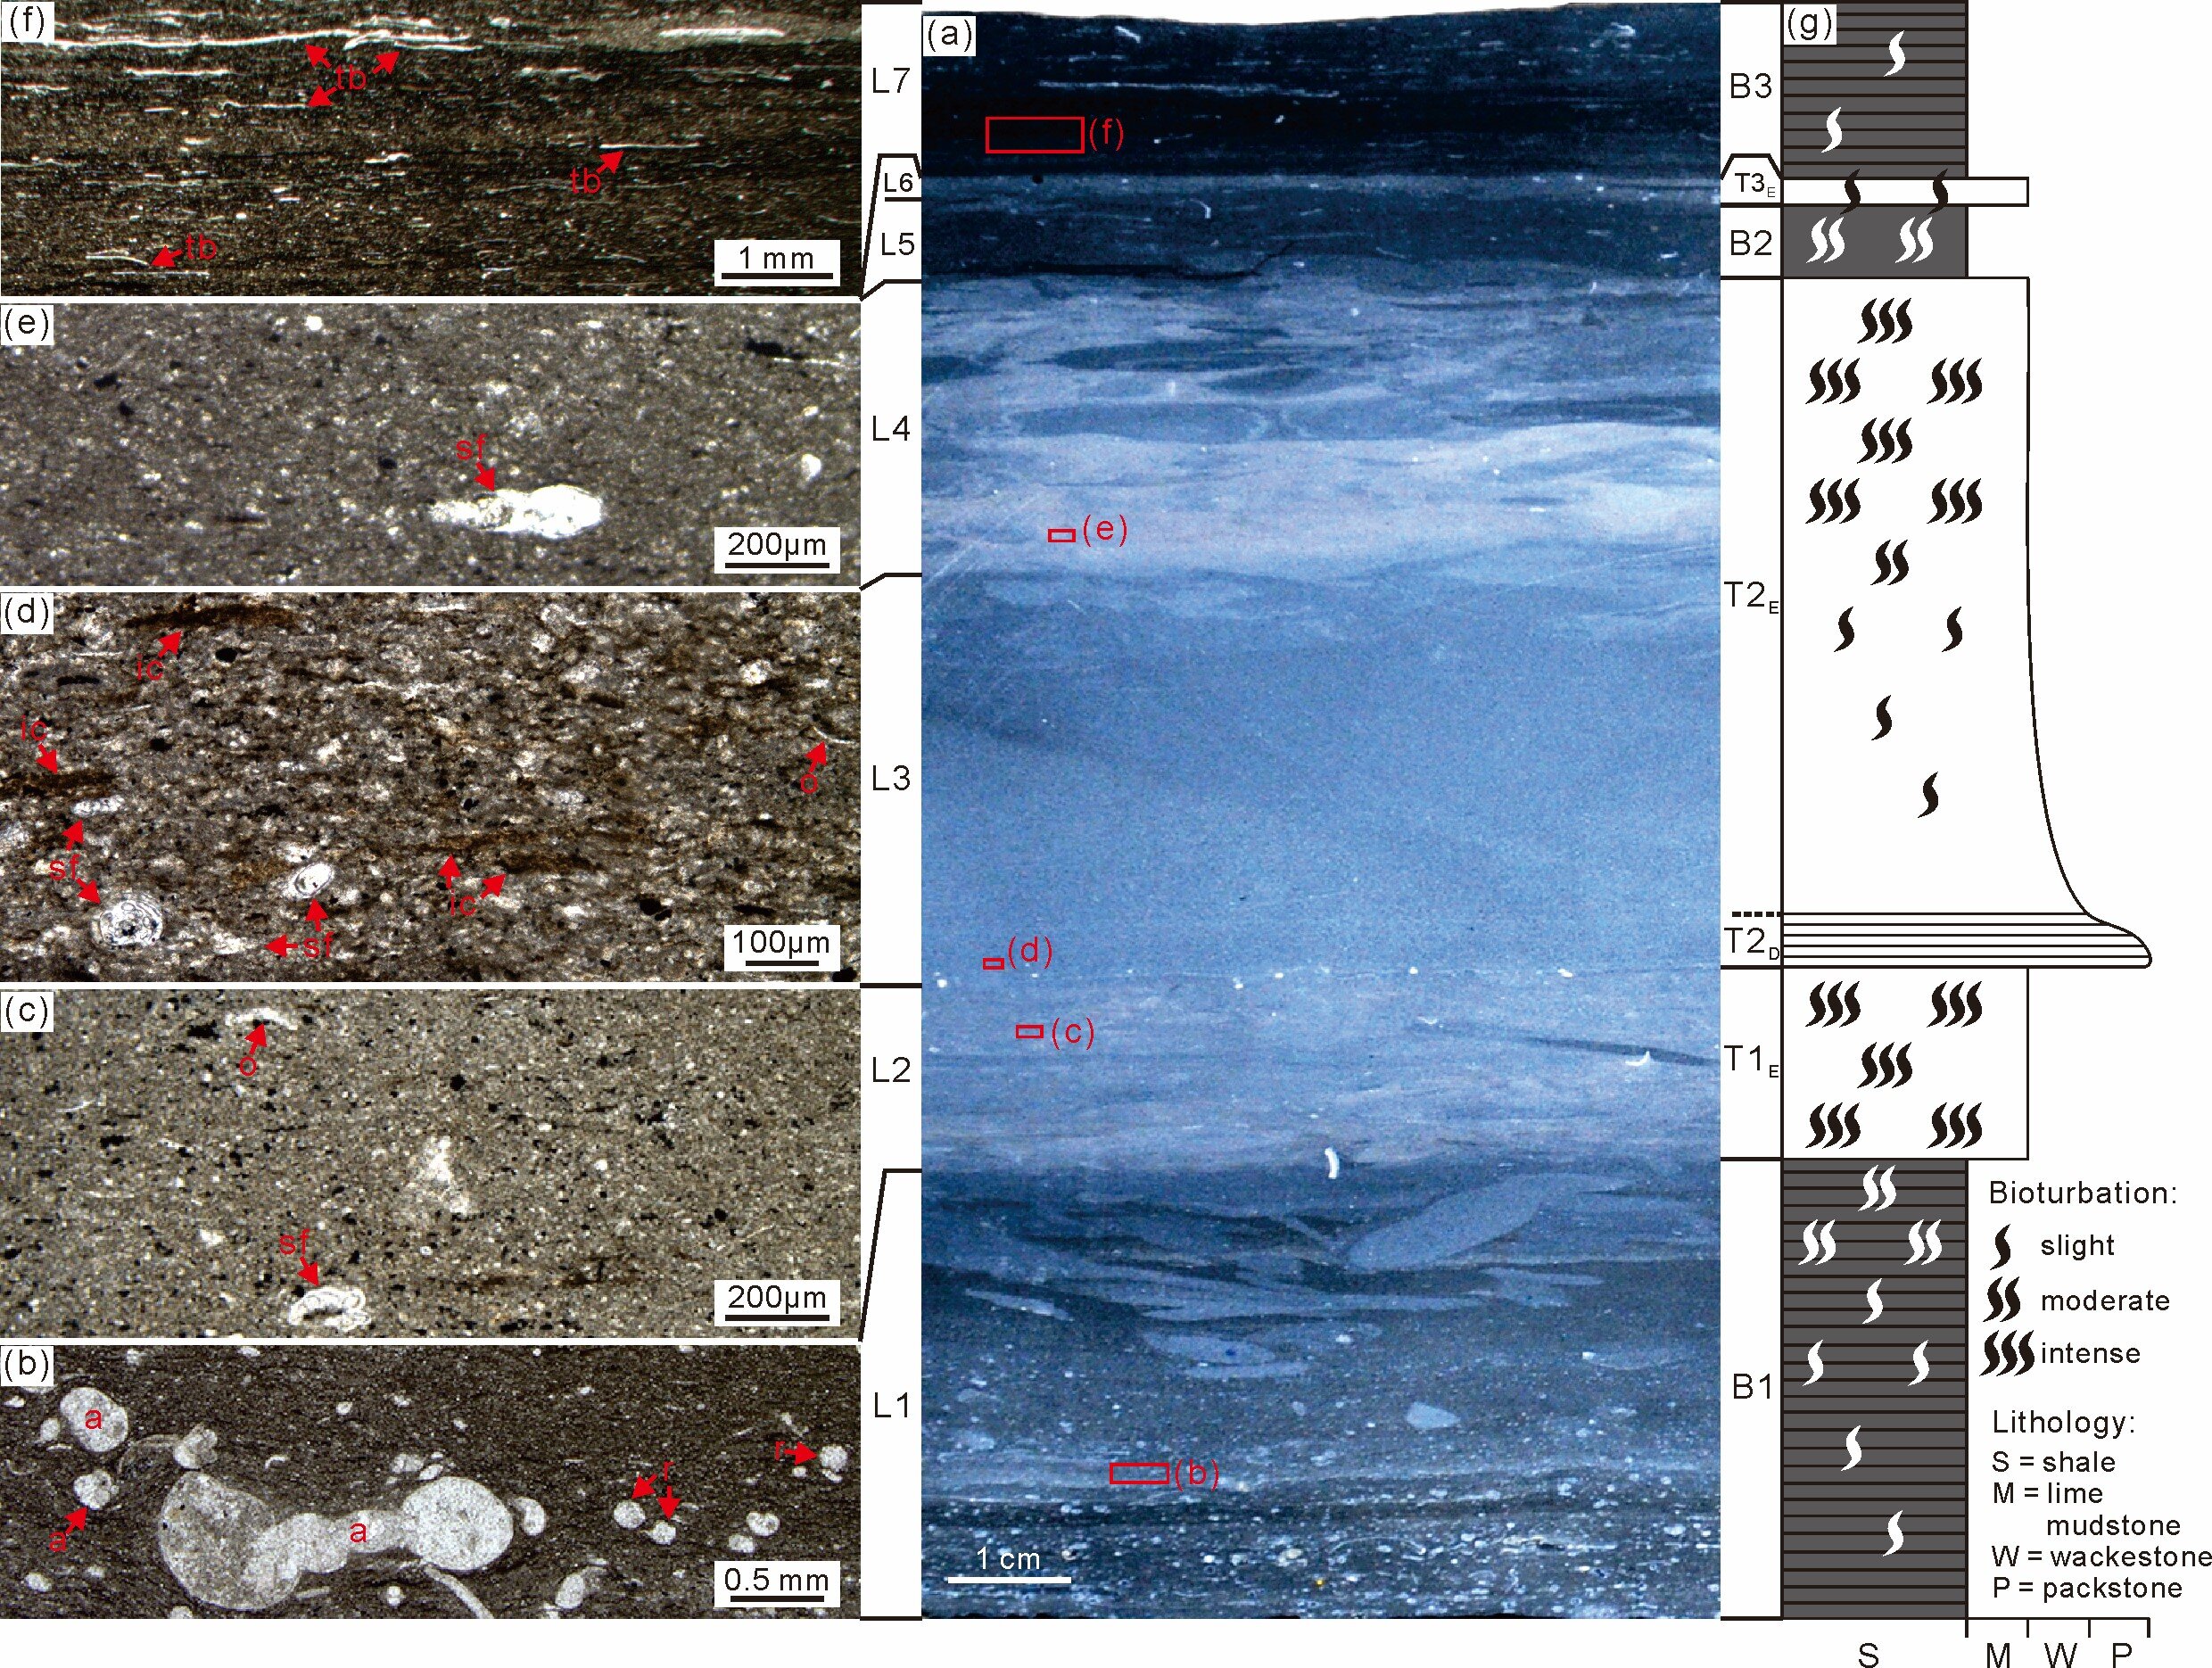 Ichnocoenoses reveal dynamic process of turbidity current–induced benthic-marine oxygenation